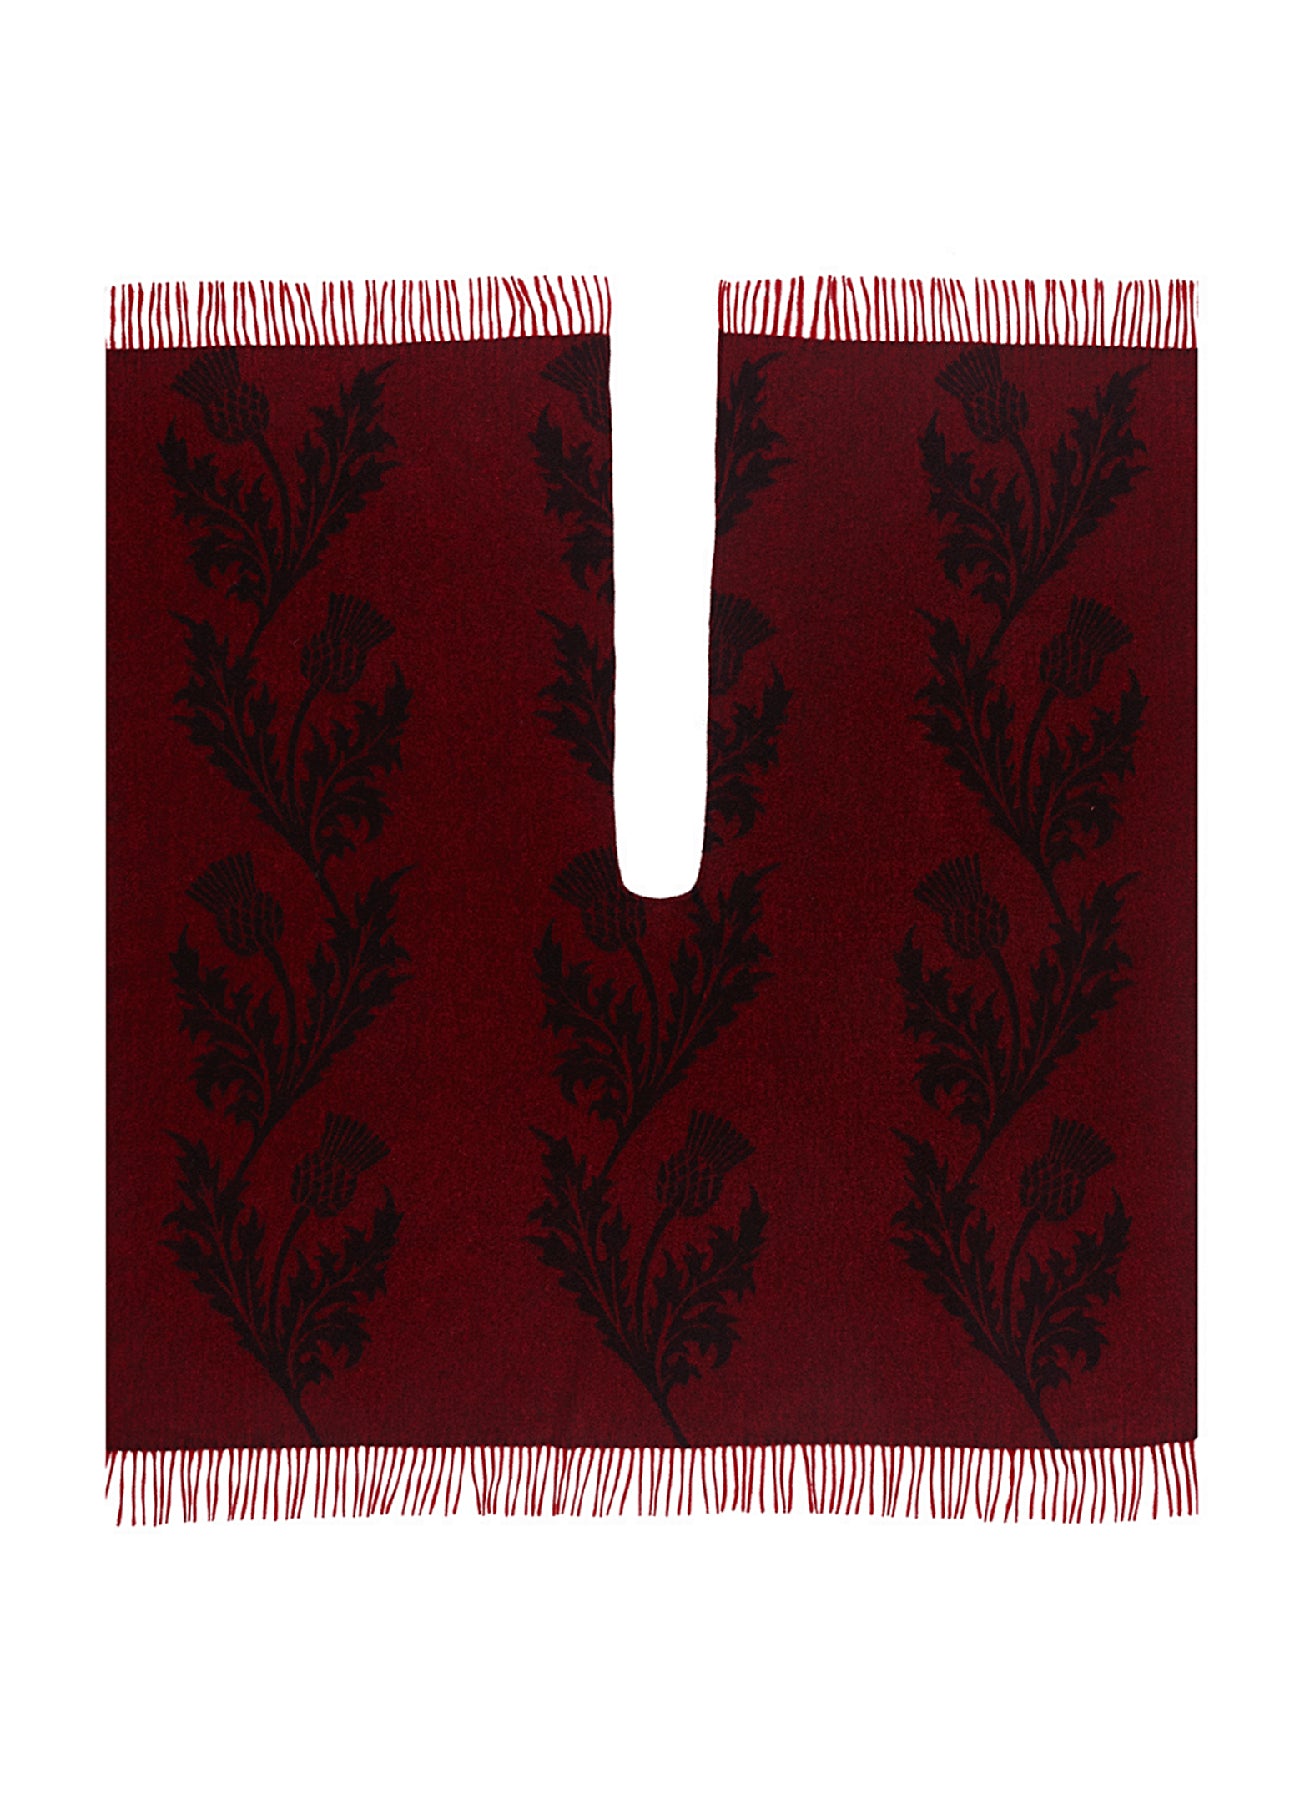 Cape Single Thistle Red Poncho 100% Pure Lambswool